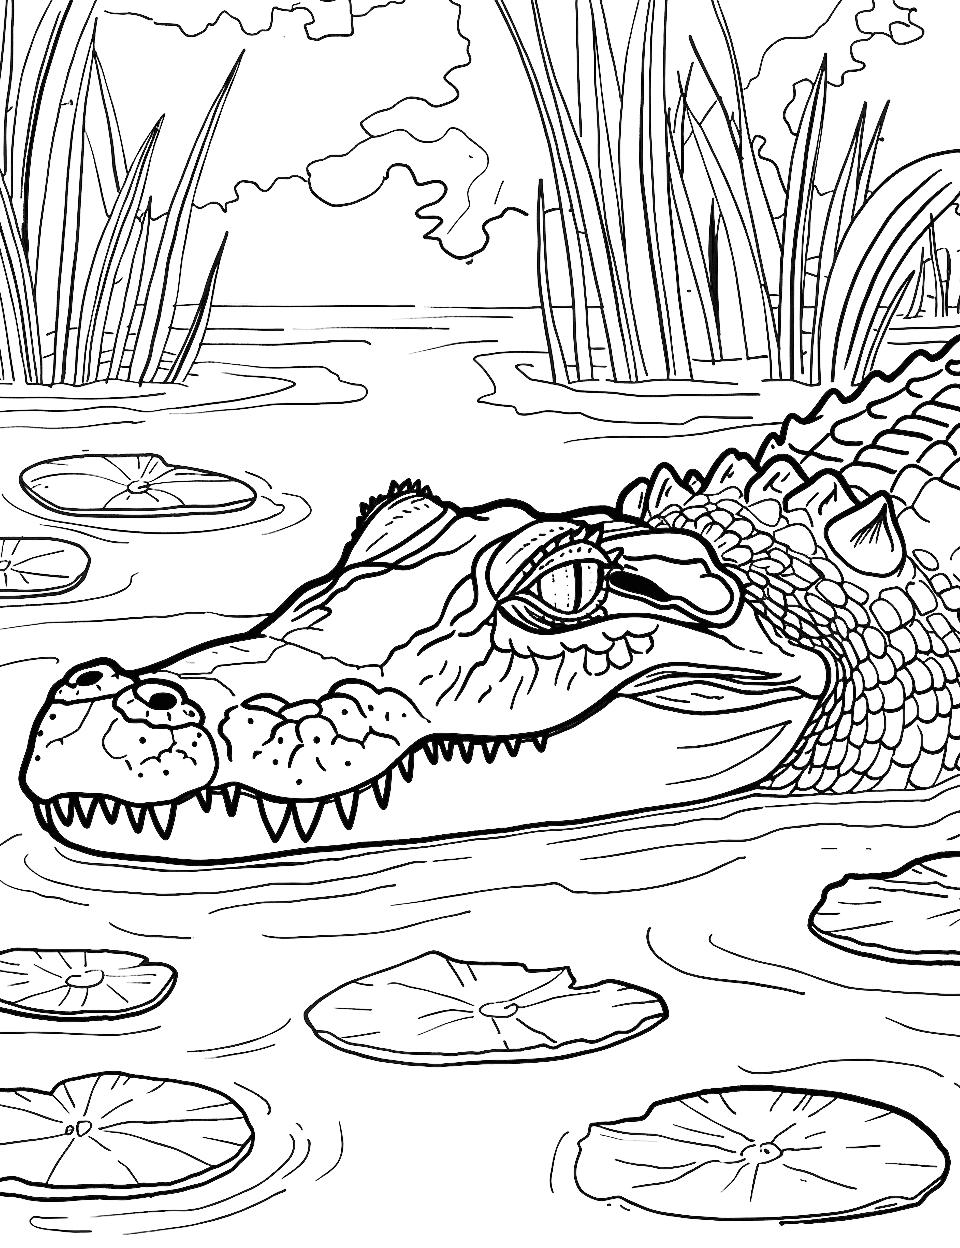 Swamp Adventure Crocodile Coloring Page - A crocodile peeking out from murky swamp waters with lily pads dotted around.